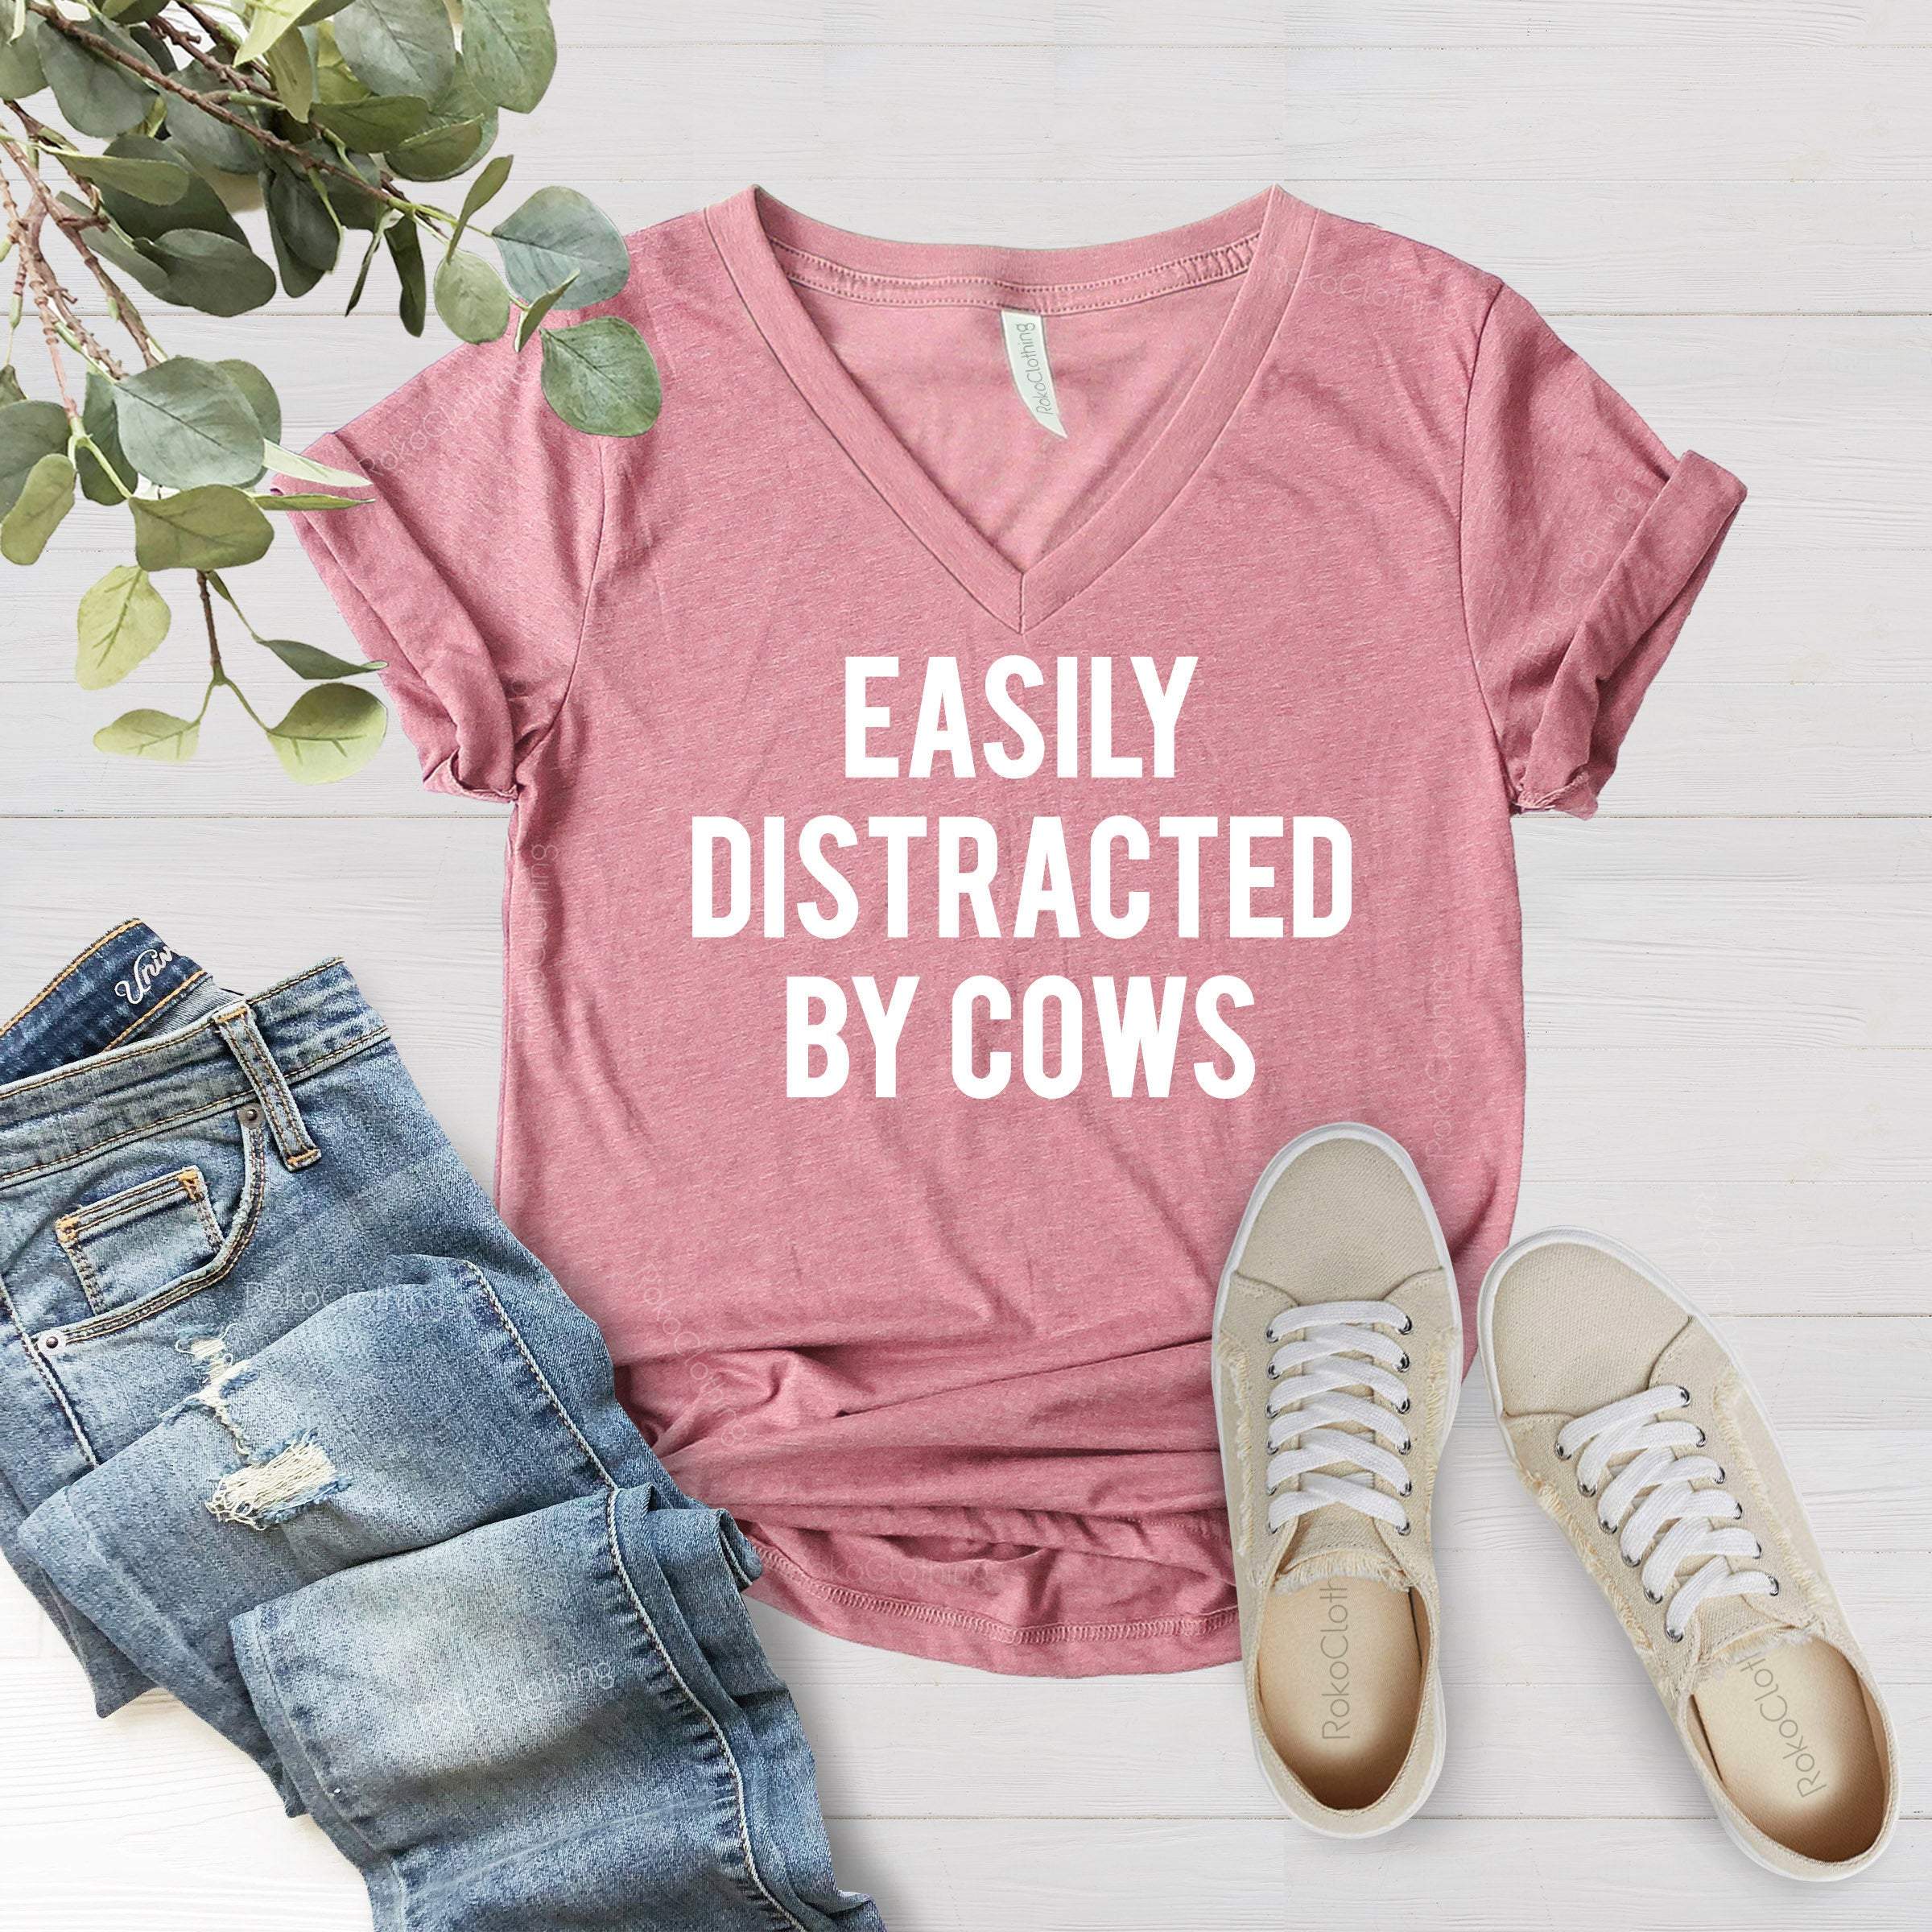 Easily Distracted By Cows Shirt, Cow Lover Shirt, Funny Cow Tee, Cow Tshirt, Cow Shirt, Farm Girl, Dairy Farm Farming Shirt, Farm Shirt